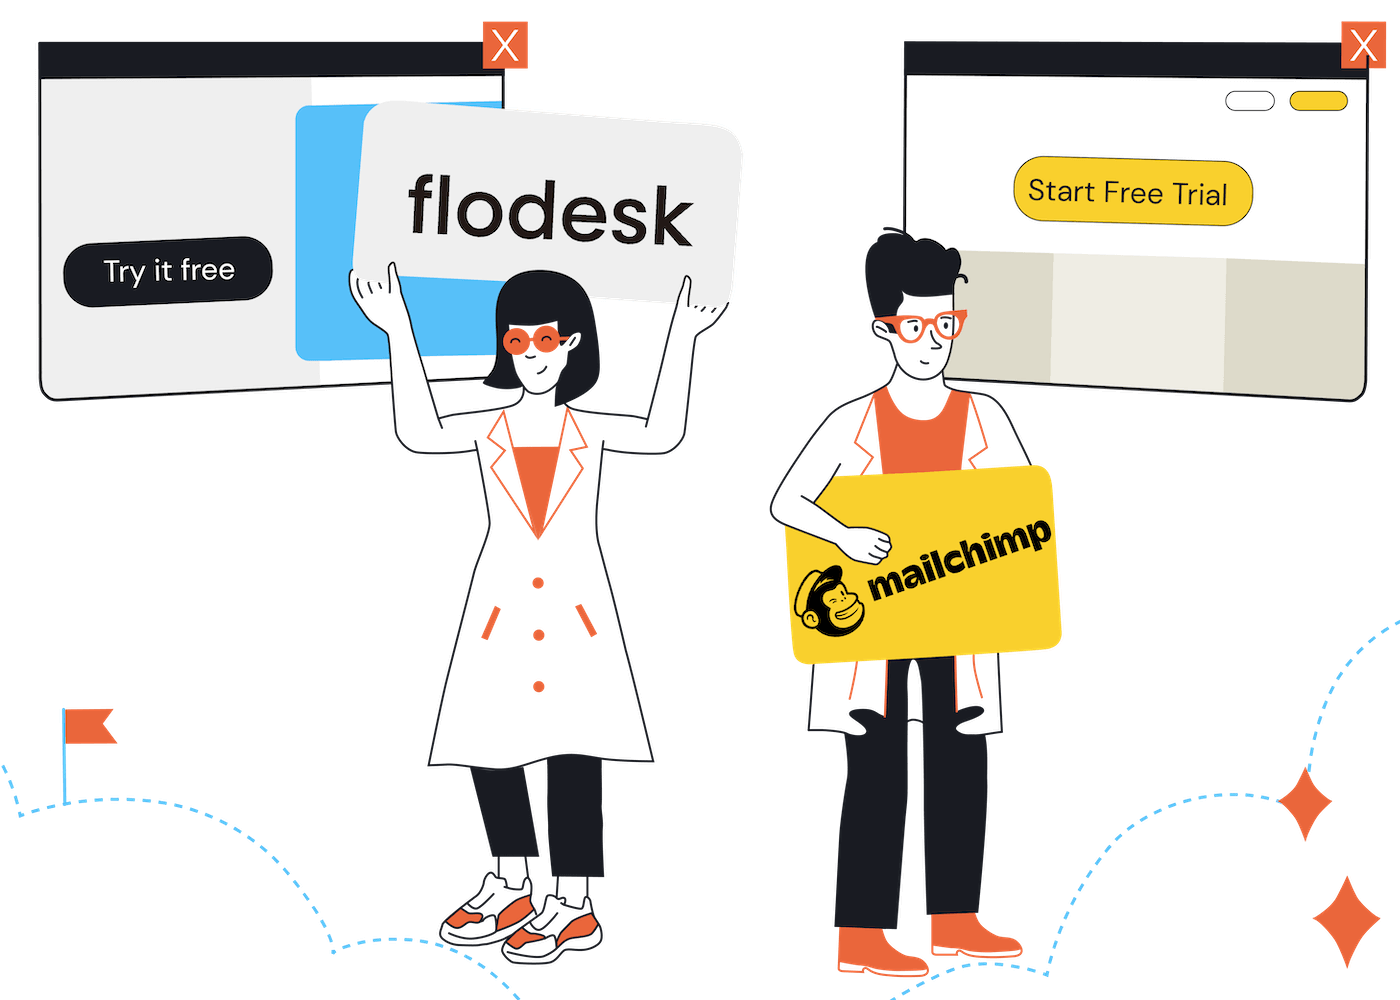 emailtooltester:-flodesk-vs-mailchimp-2023-review:-the-rising-star-or-old-is-gold?